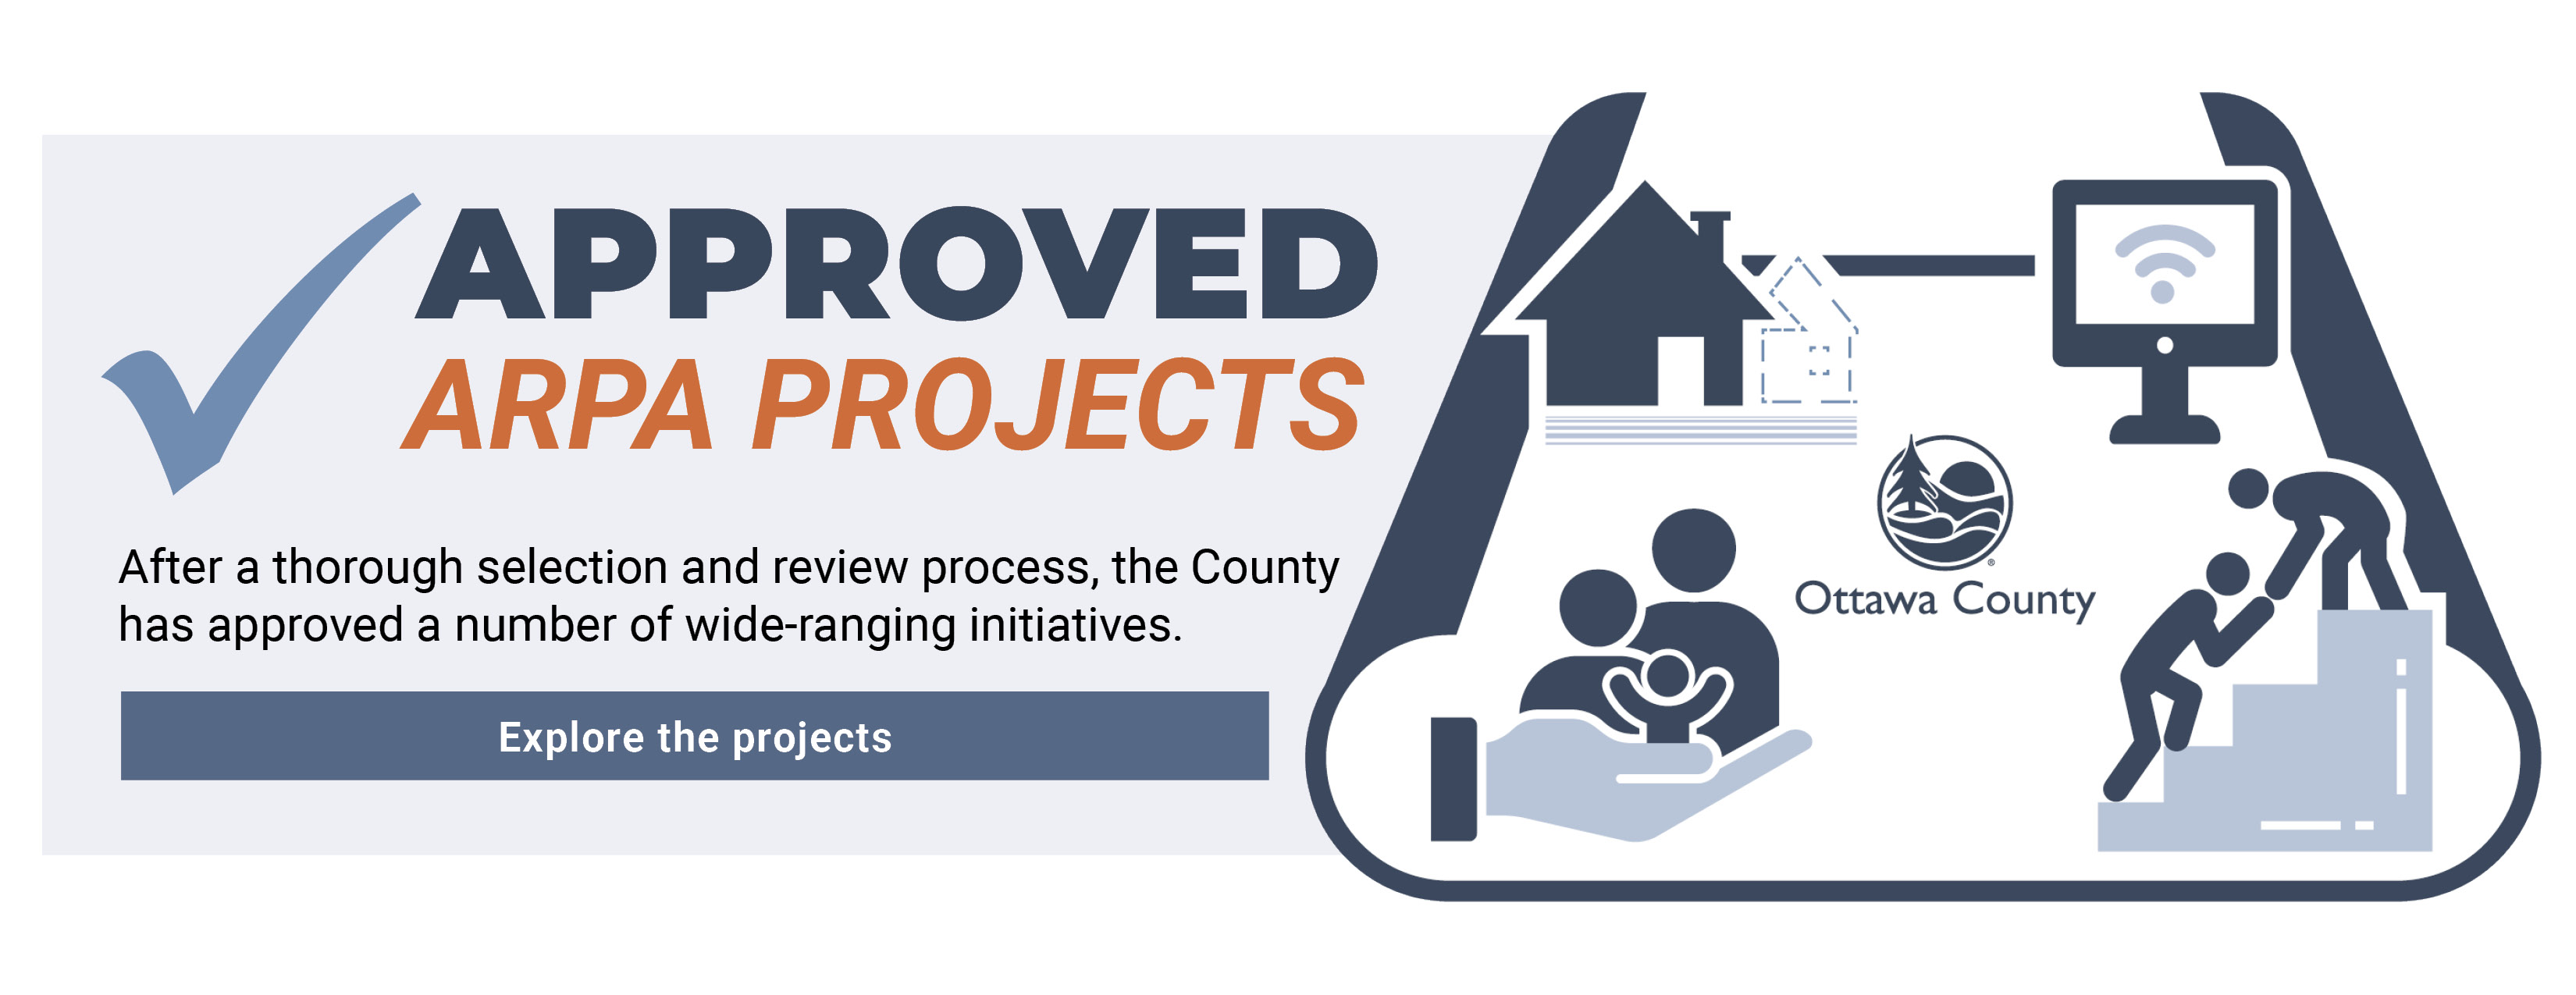 Approved ARPA Projects: After a thorough selection and review process, the County has approved a number of wide-ranging initiatives